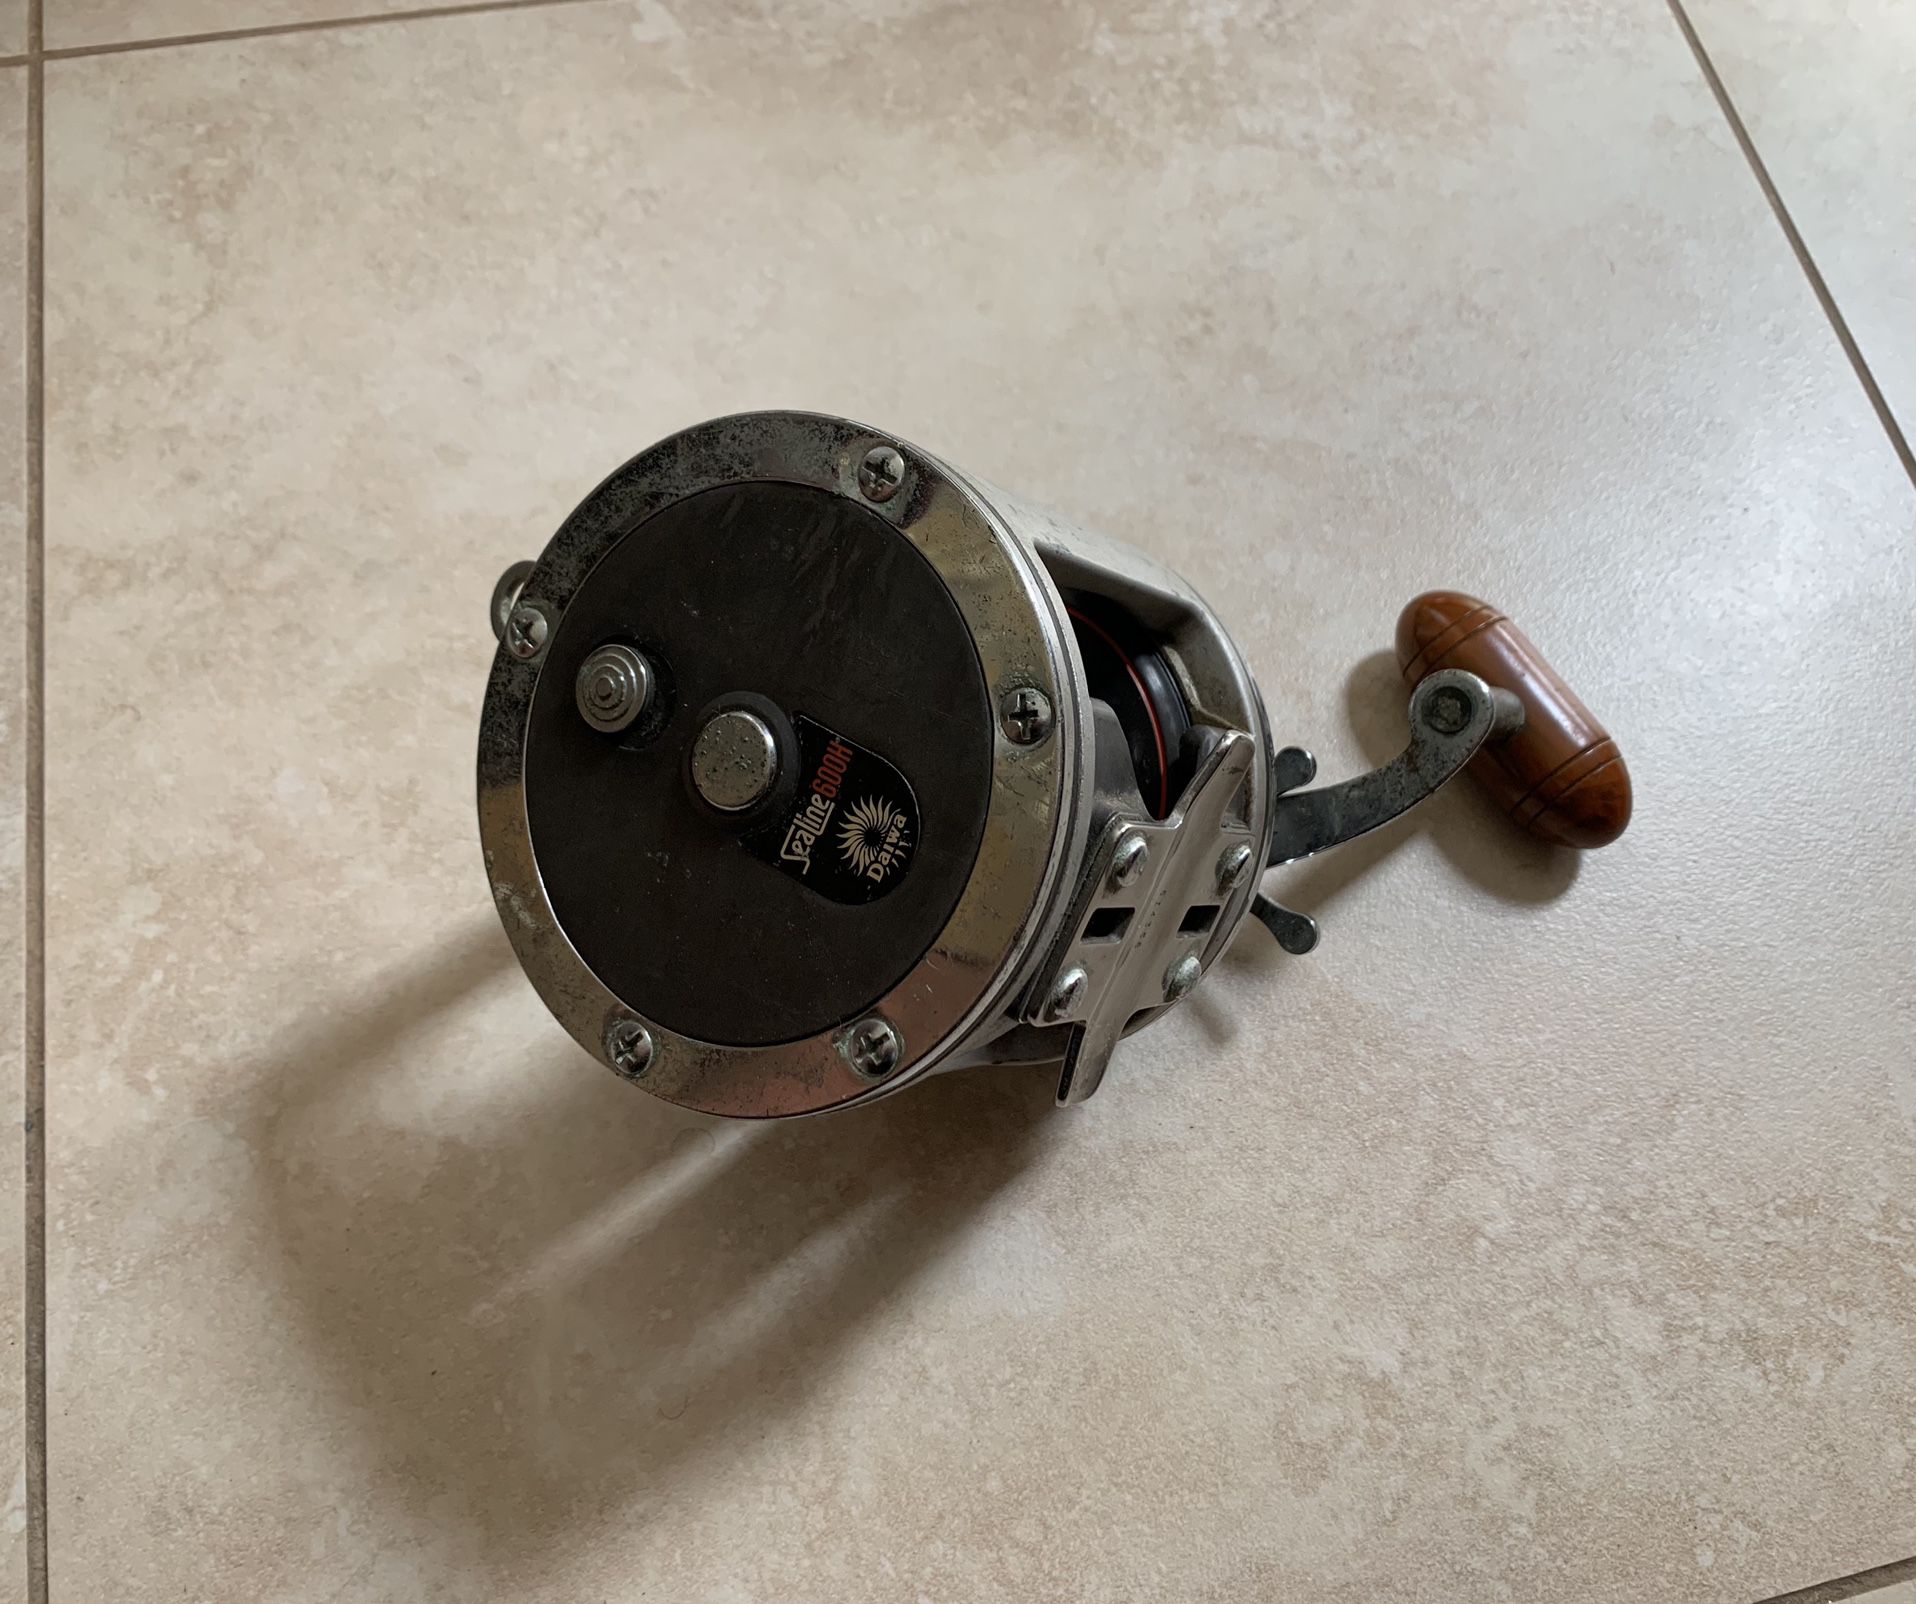 Daiwa Sealine 600H Conventional Fishing Reel, Made In Japan for